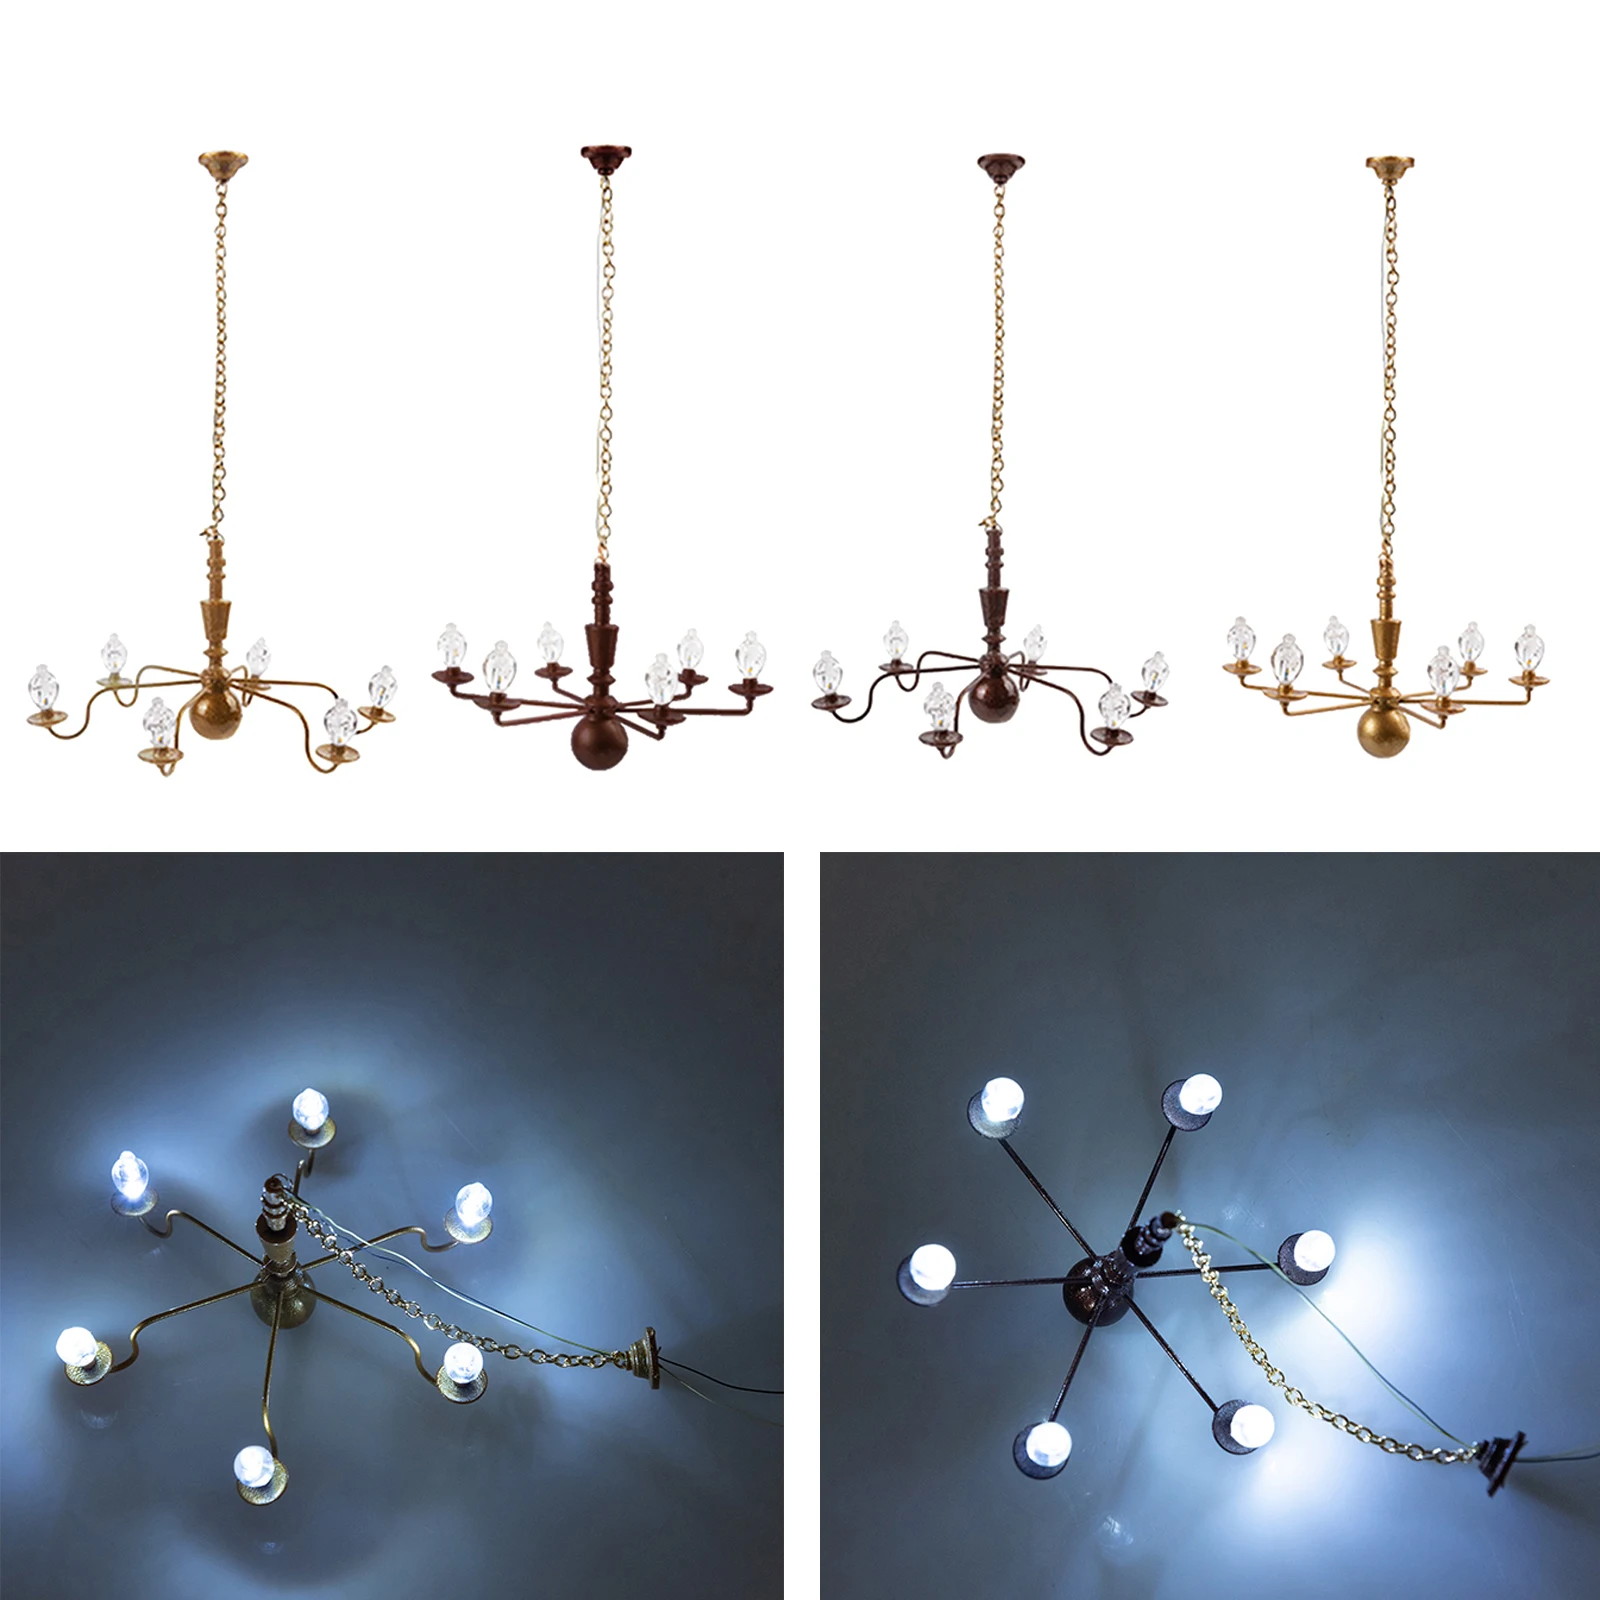 1/87 HO Scale Ceiling Light Hanging Chandelier DIY Architecture Model Kits